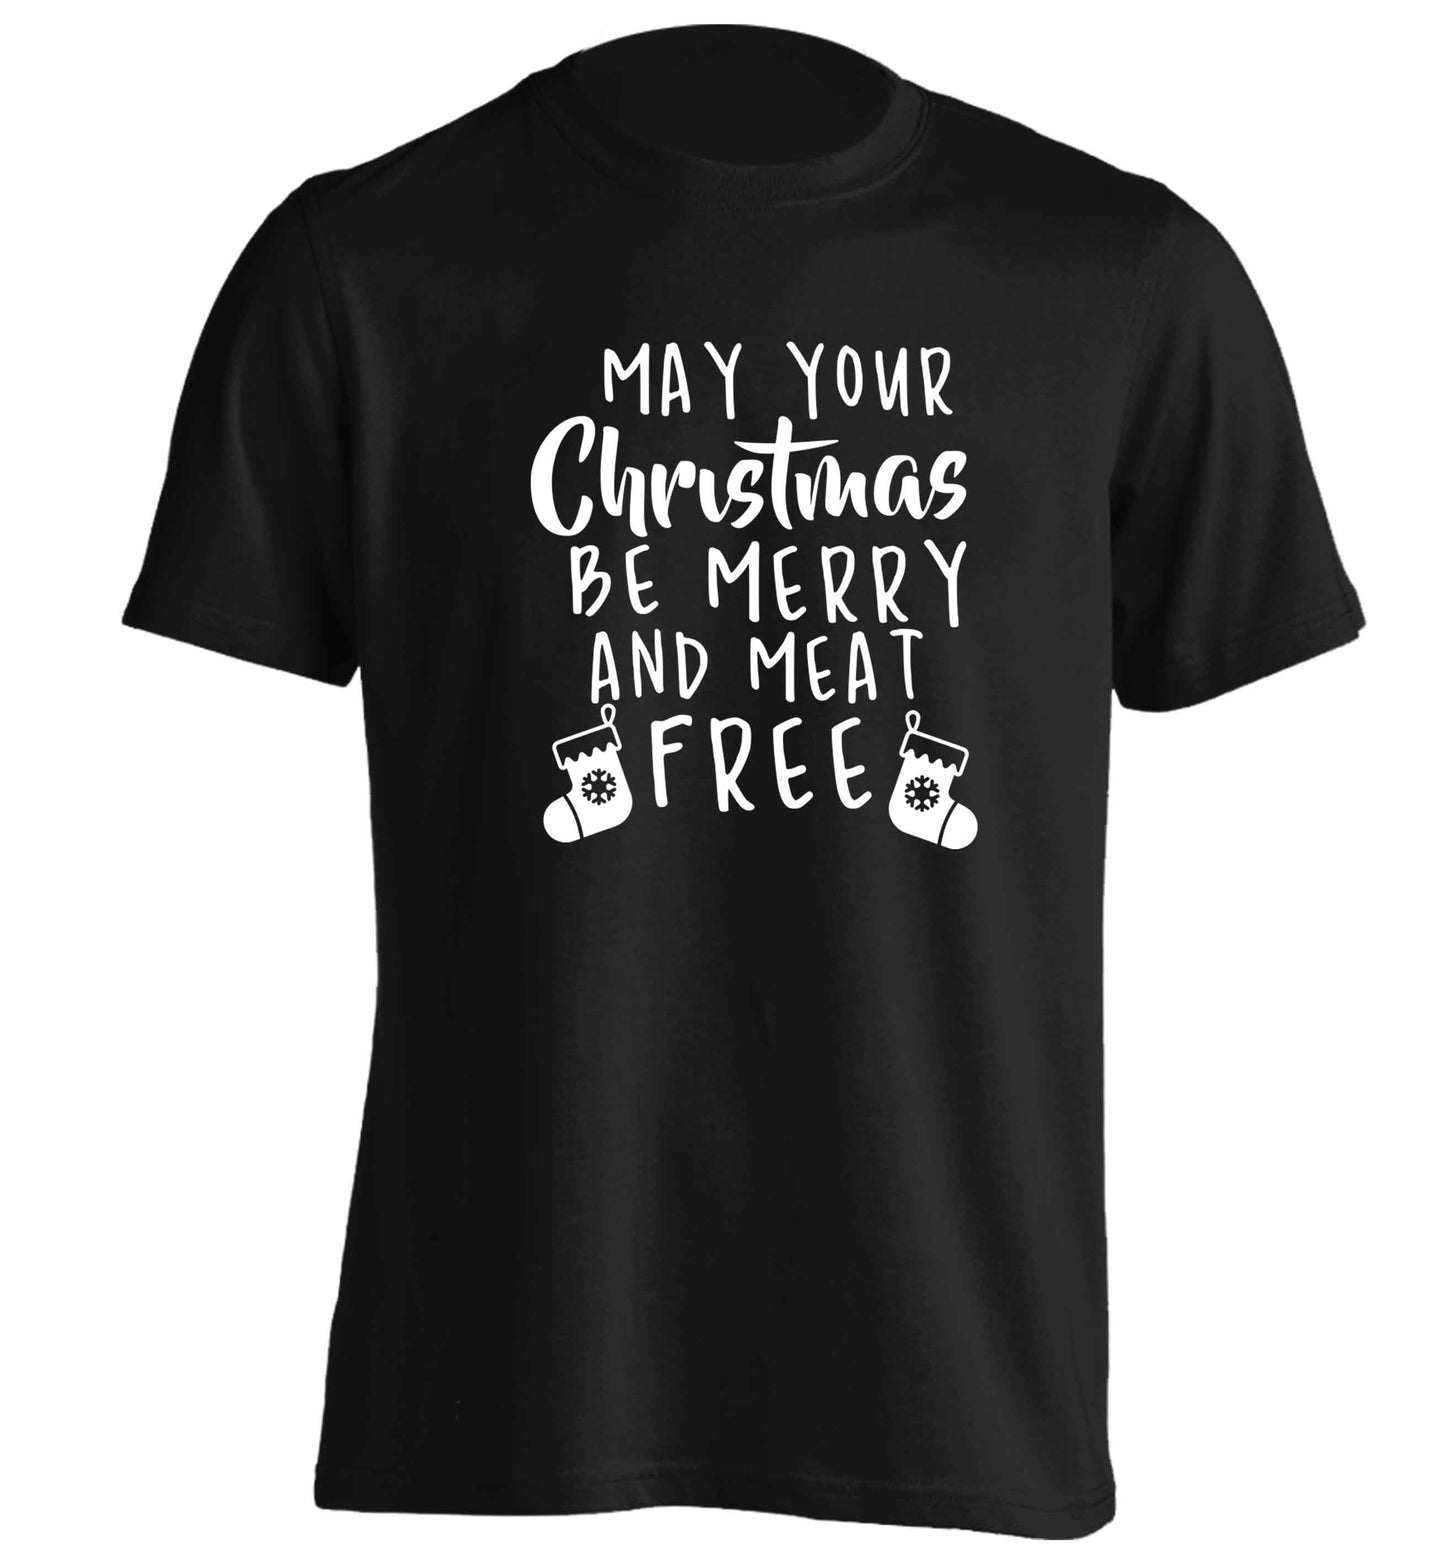 May your Christmas be merry and meat free adults unisex black Tshirt 2XL